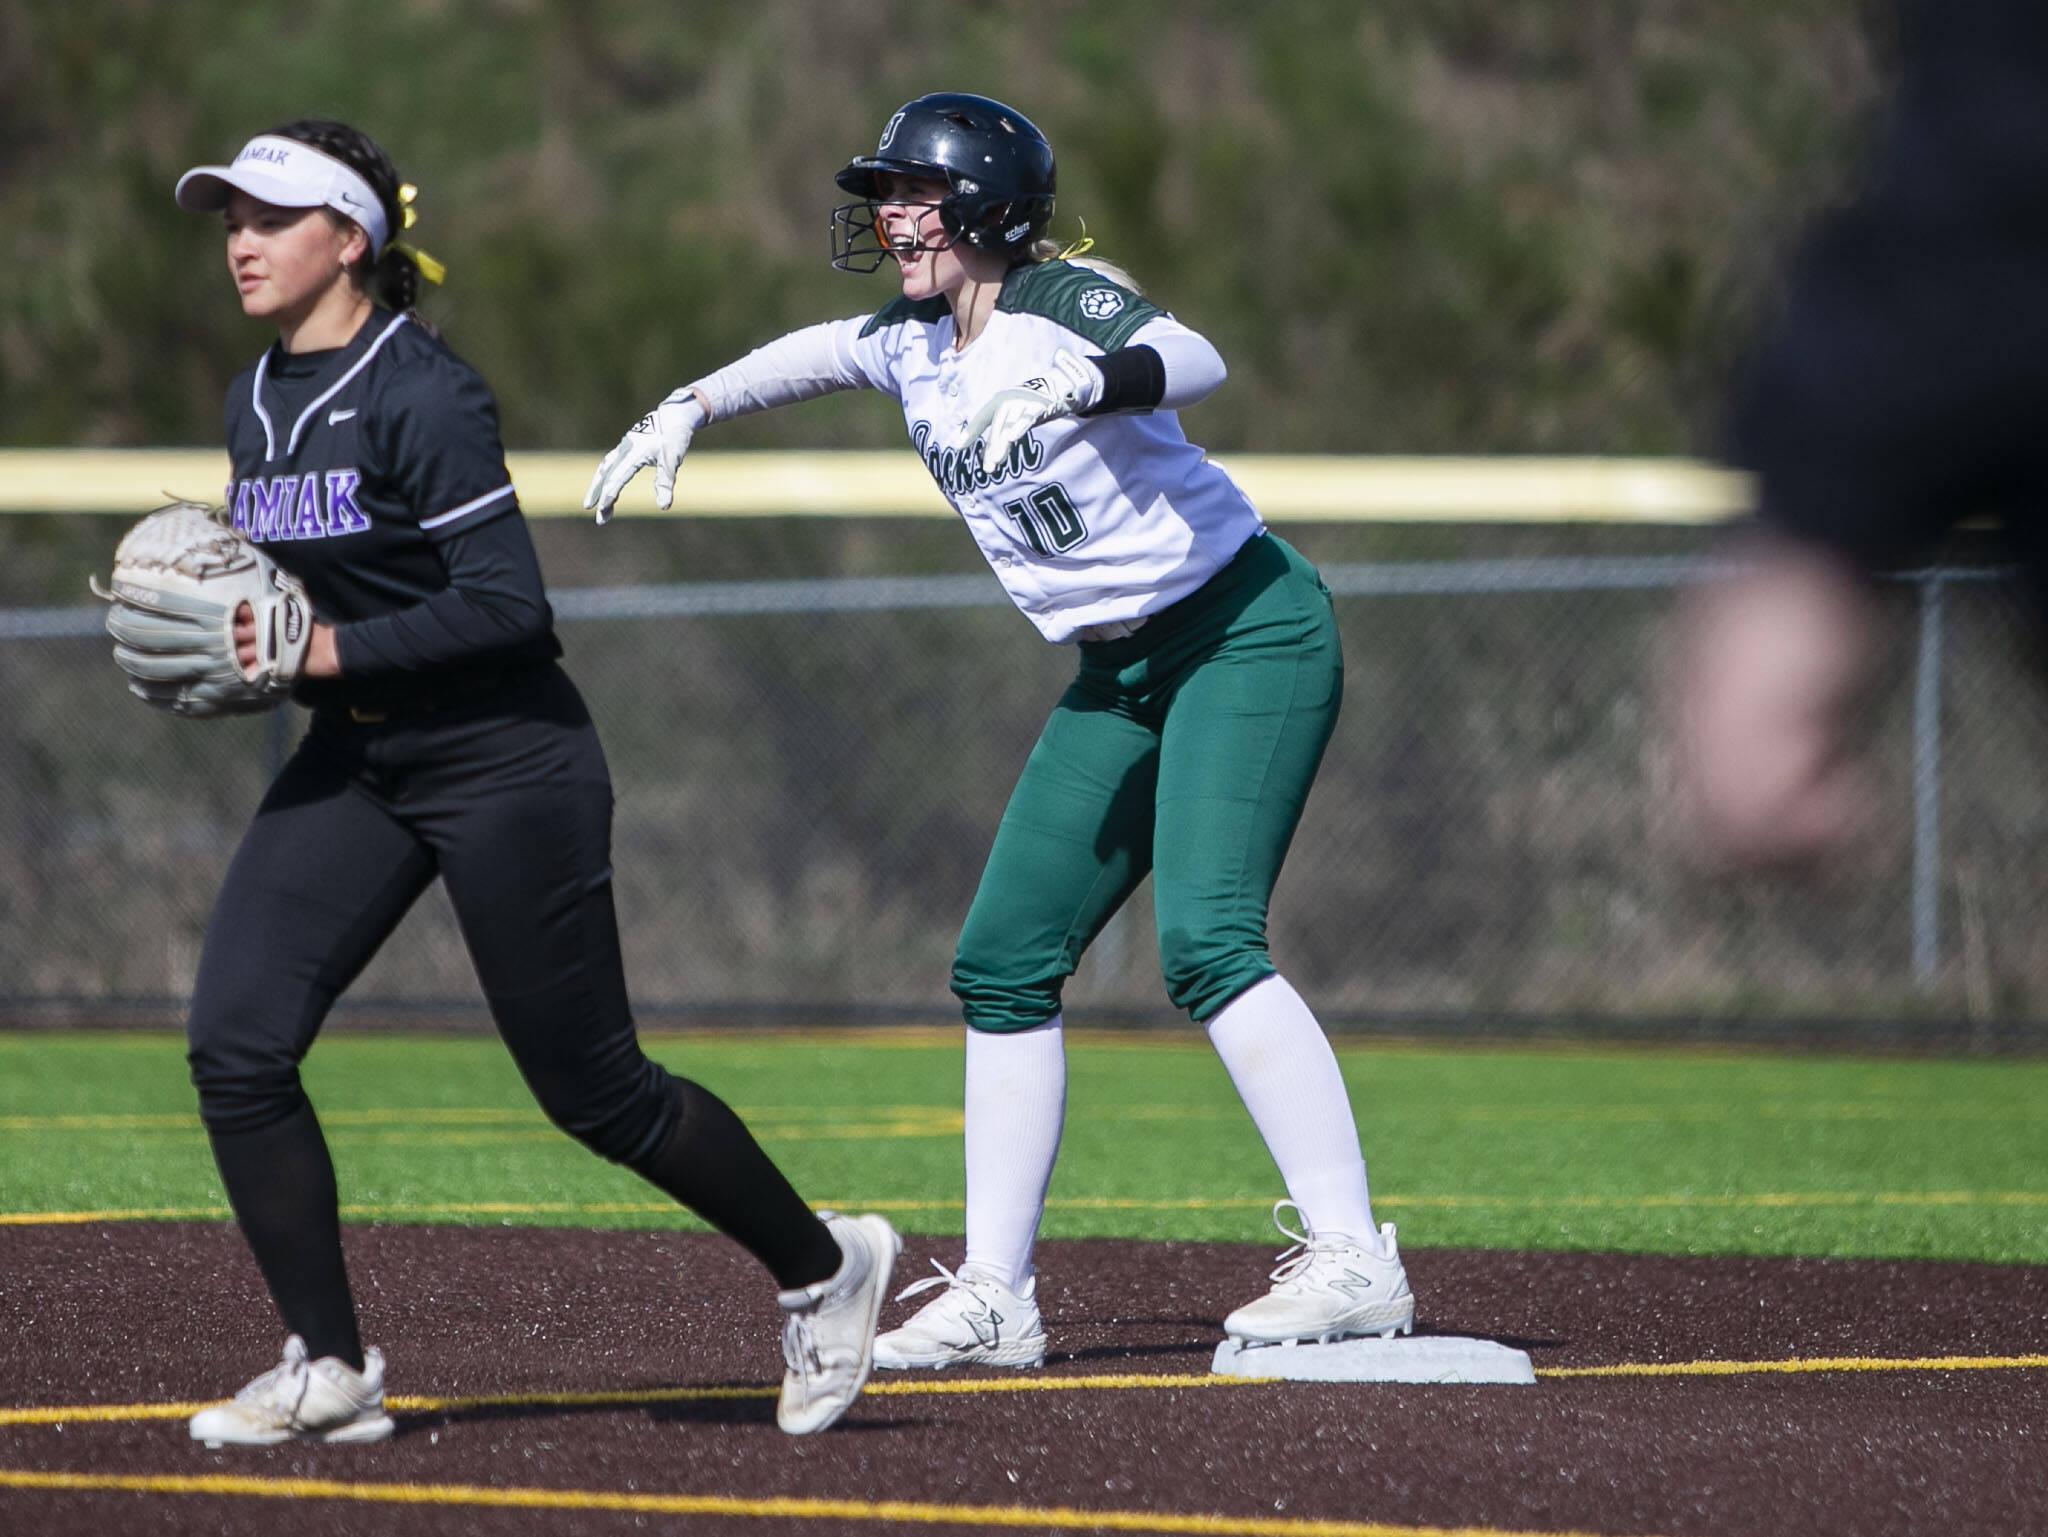 Leneyah Mitchell reacts to a hit during the game against Kamiak on Tuesday, April 11, 2023 in Everett, Washington. (Olivia Vanni / The Herald)